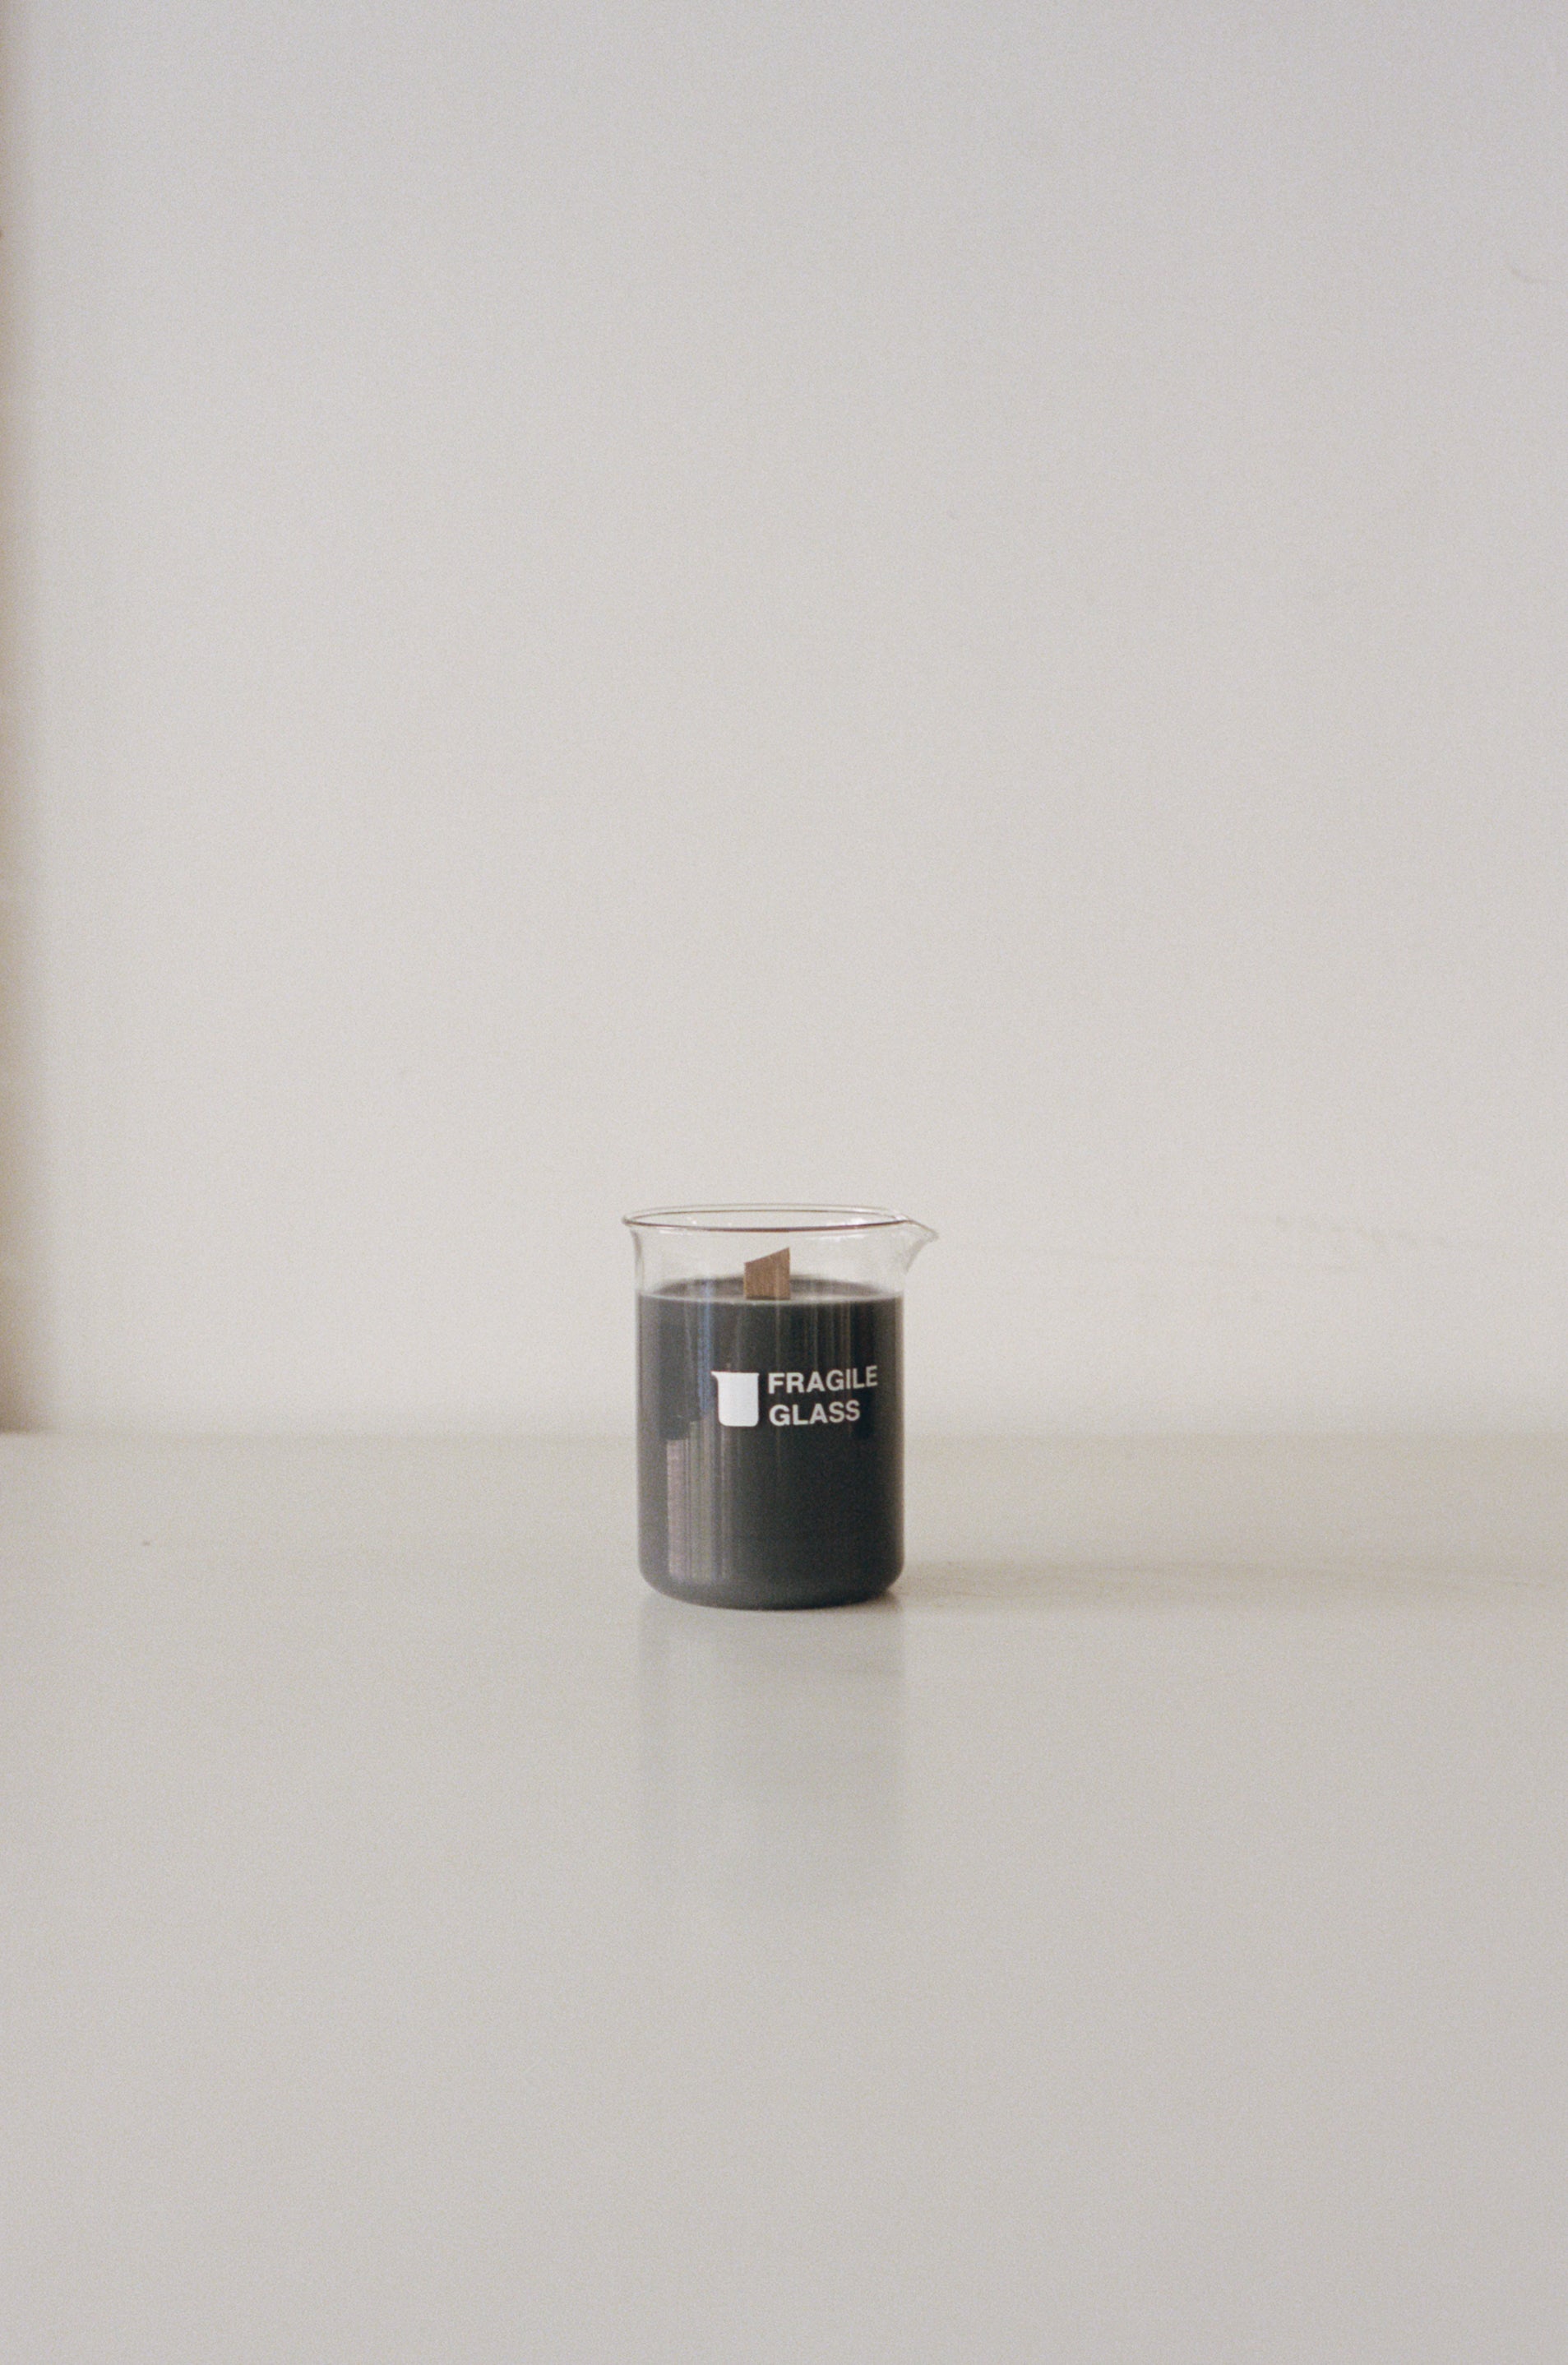 FRAGILE GLASS 'SMELL #1' CANDLE